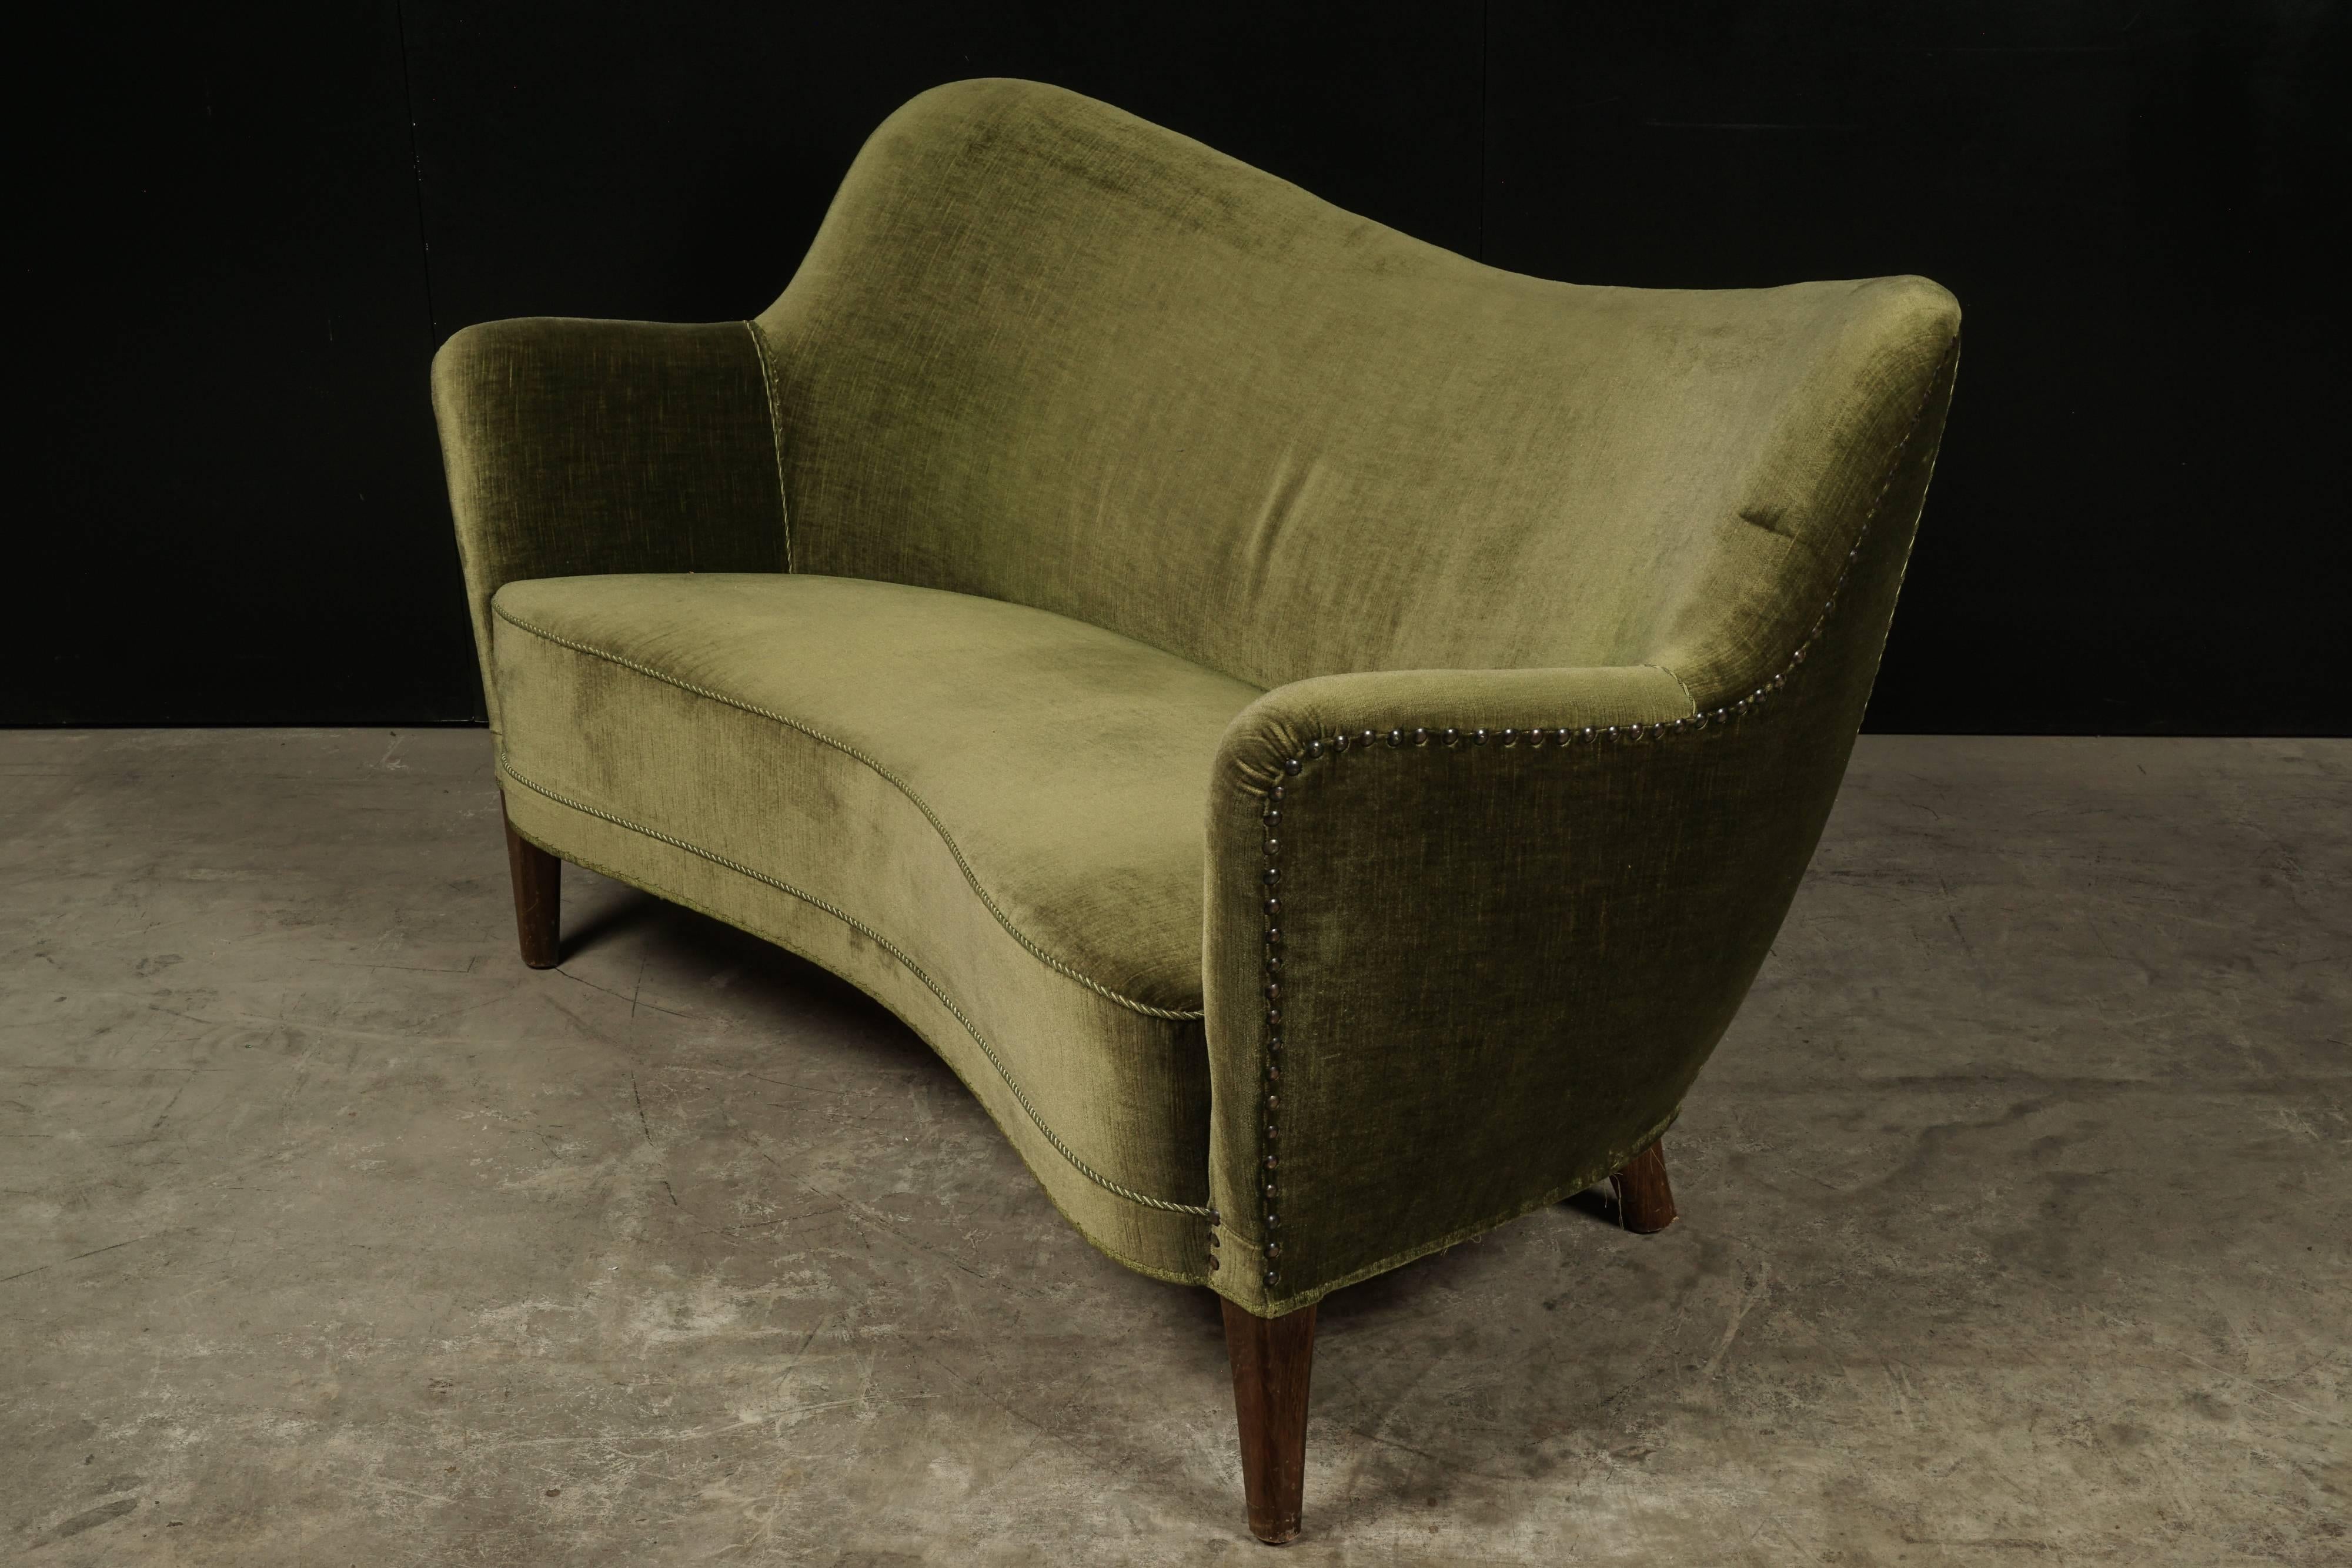 Midcentury two-seat sofa from Denmark, circa 1950. Banana form upholstered in green velour with feet of stained birch.